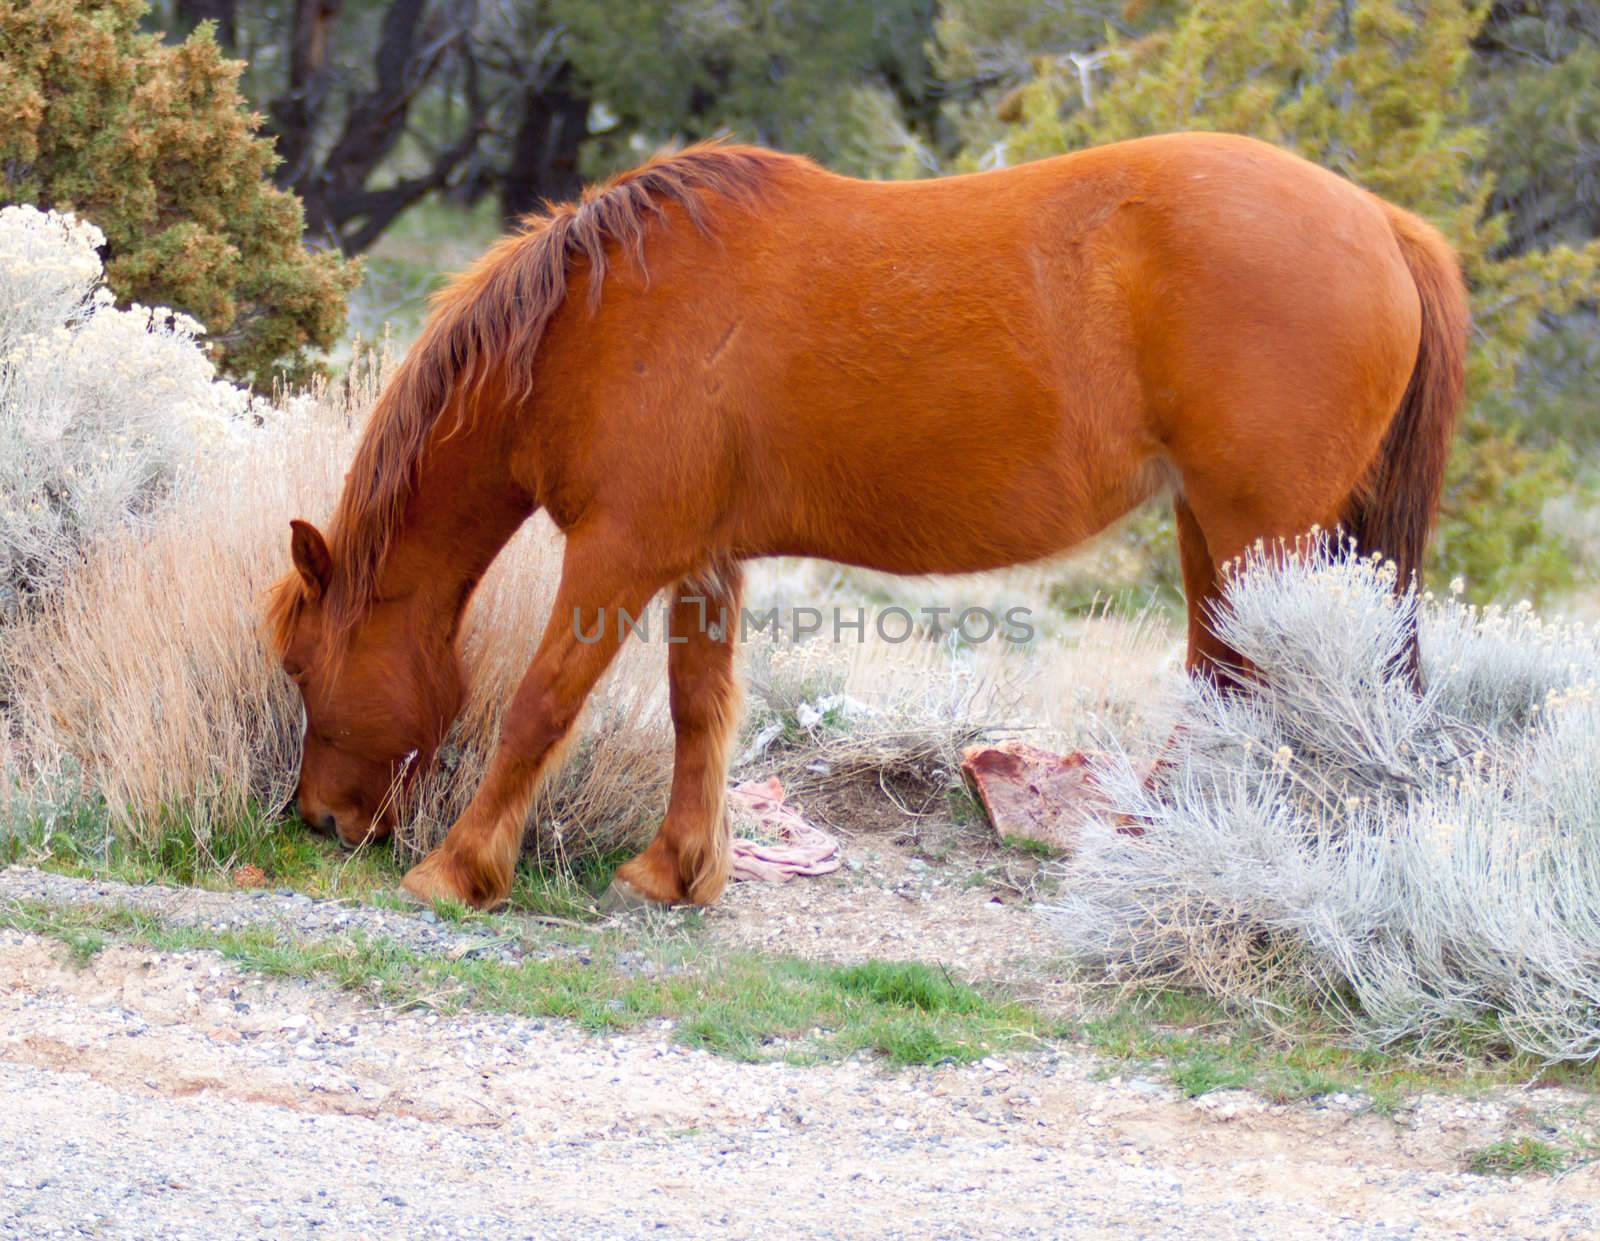 Feeding Wild Horse by strotter13